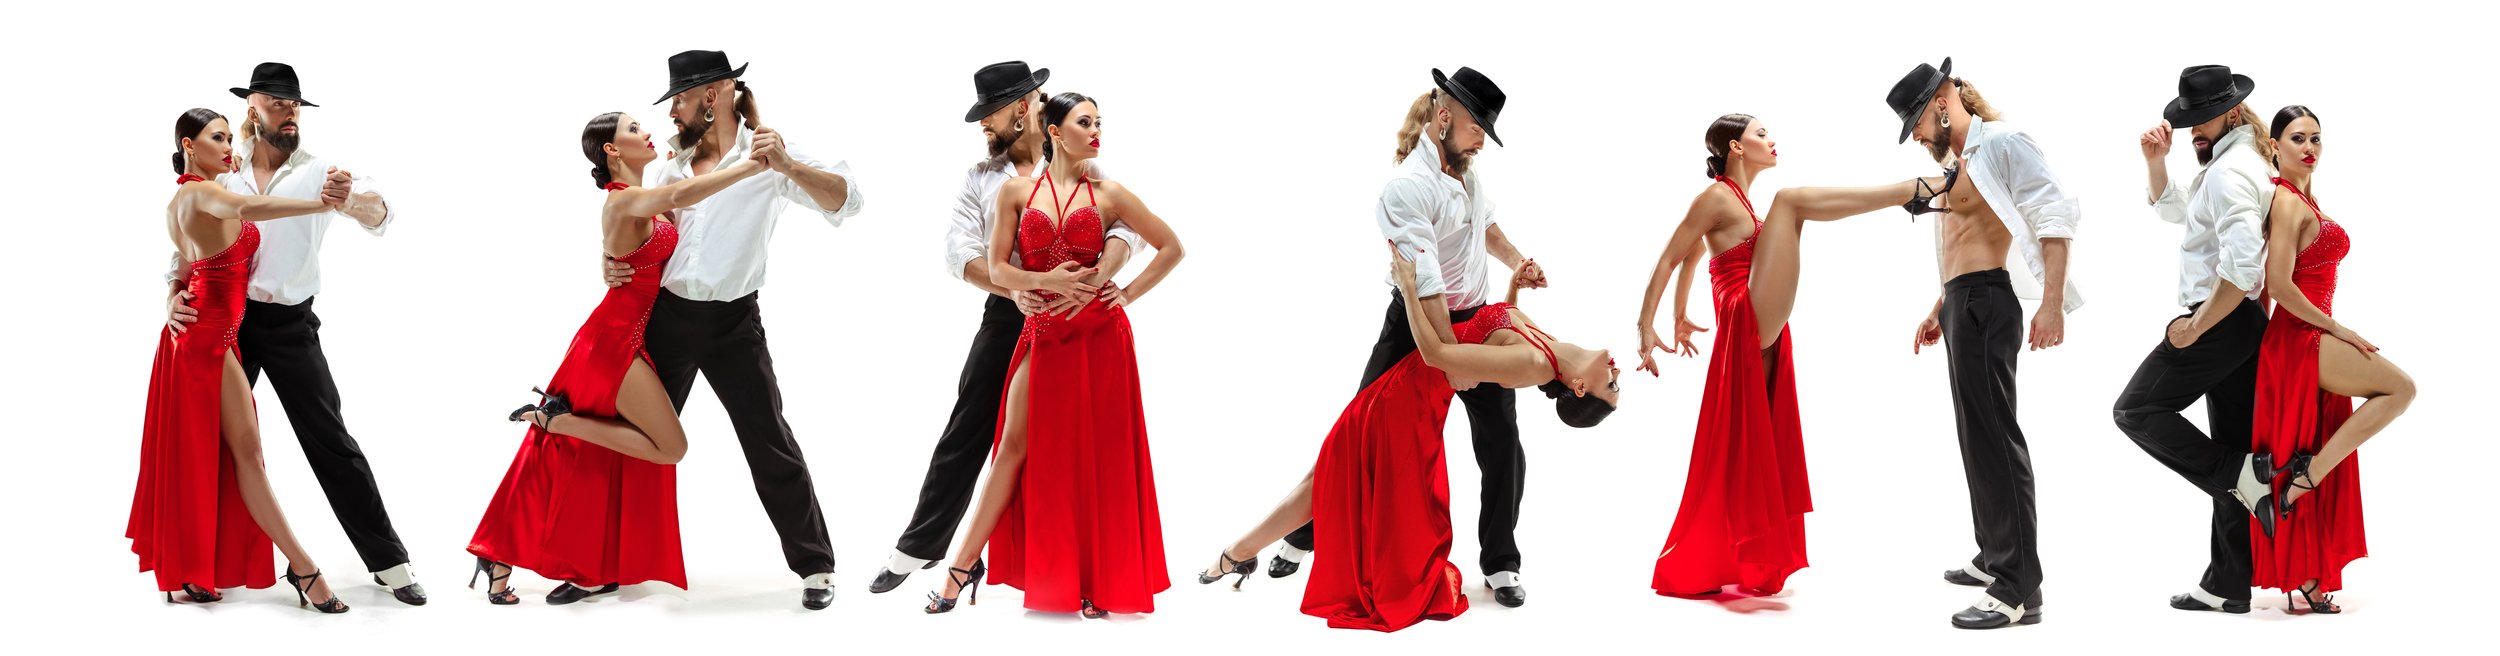 30,000+ Tango Pictures | Download Free Images on Unsplash